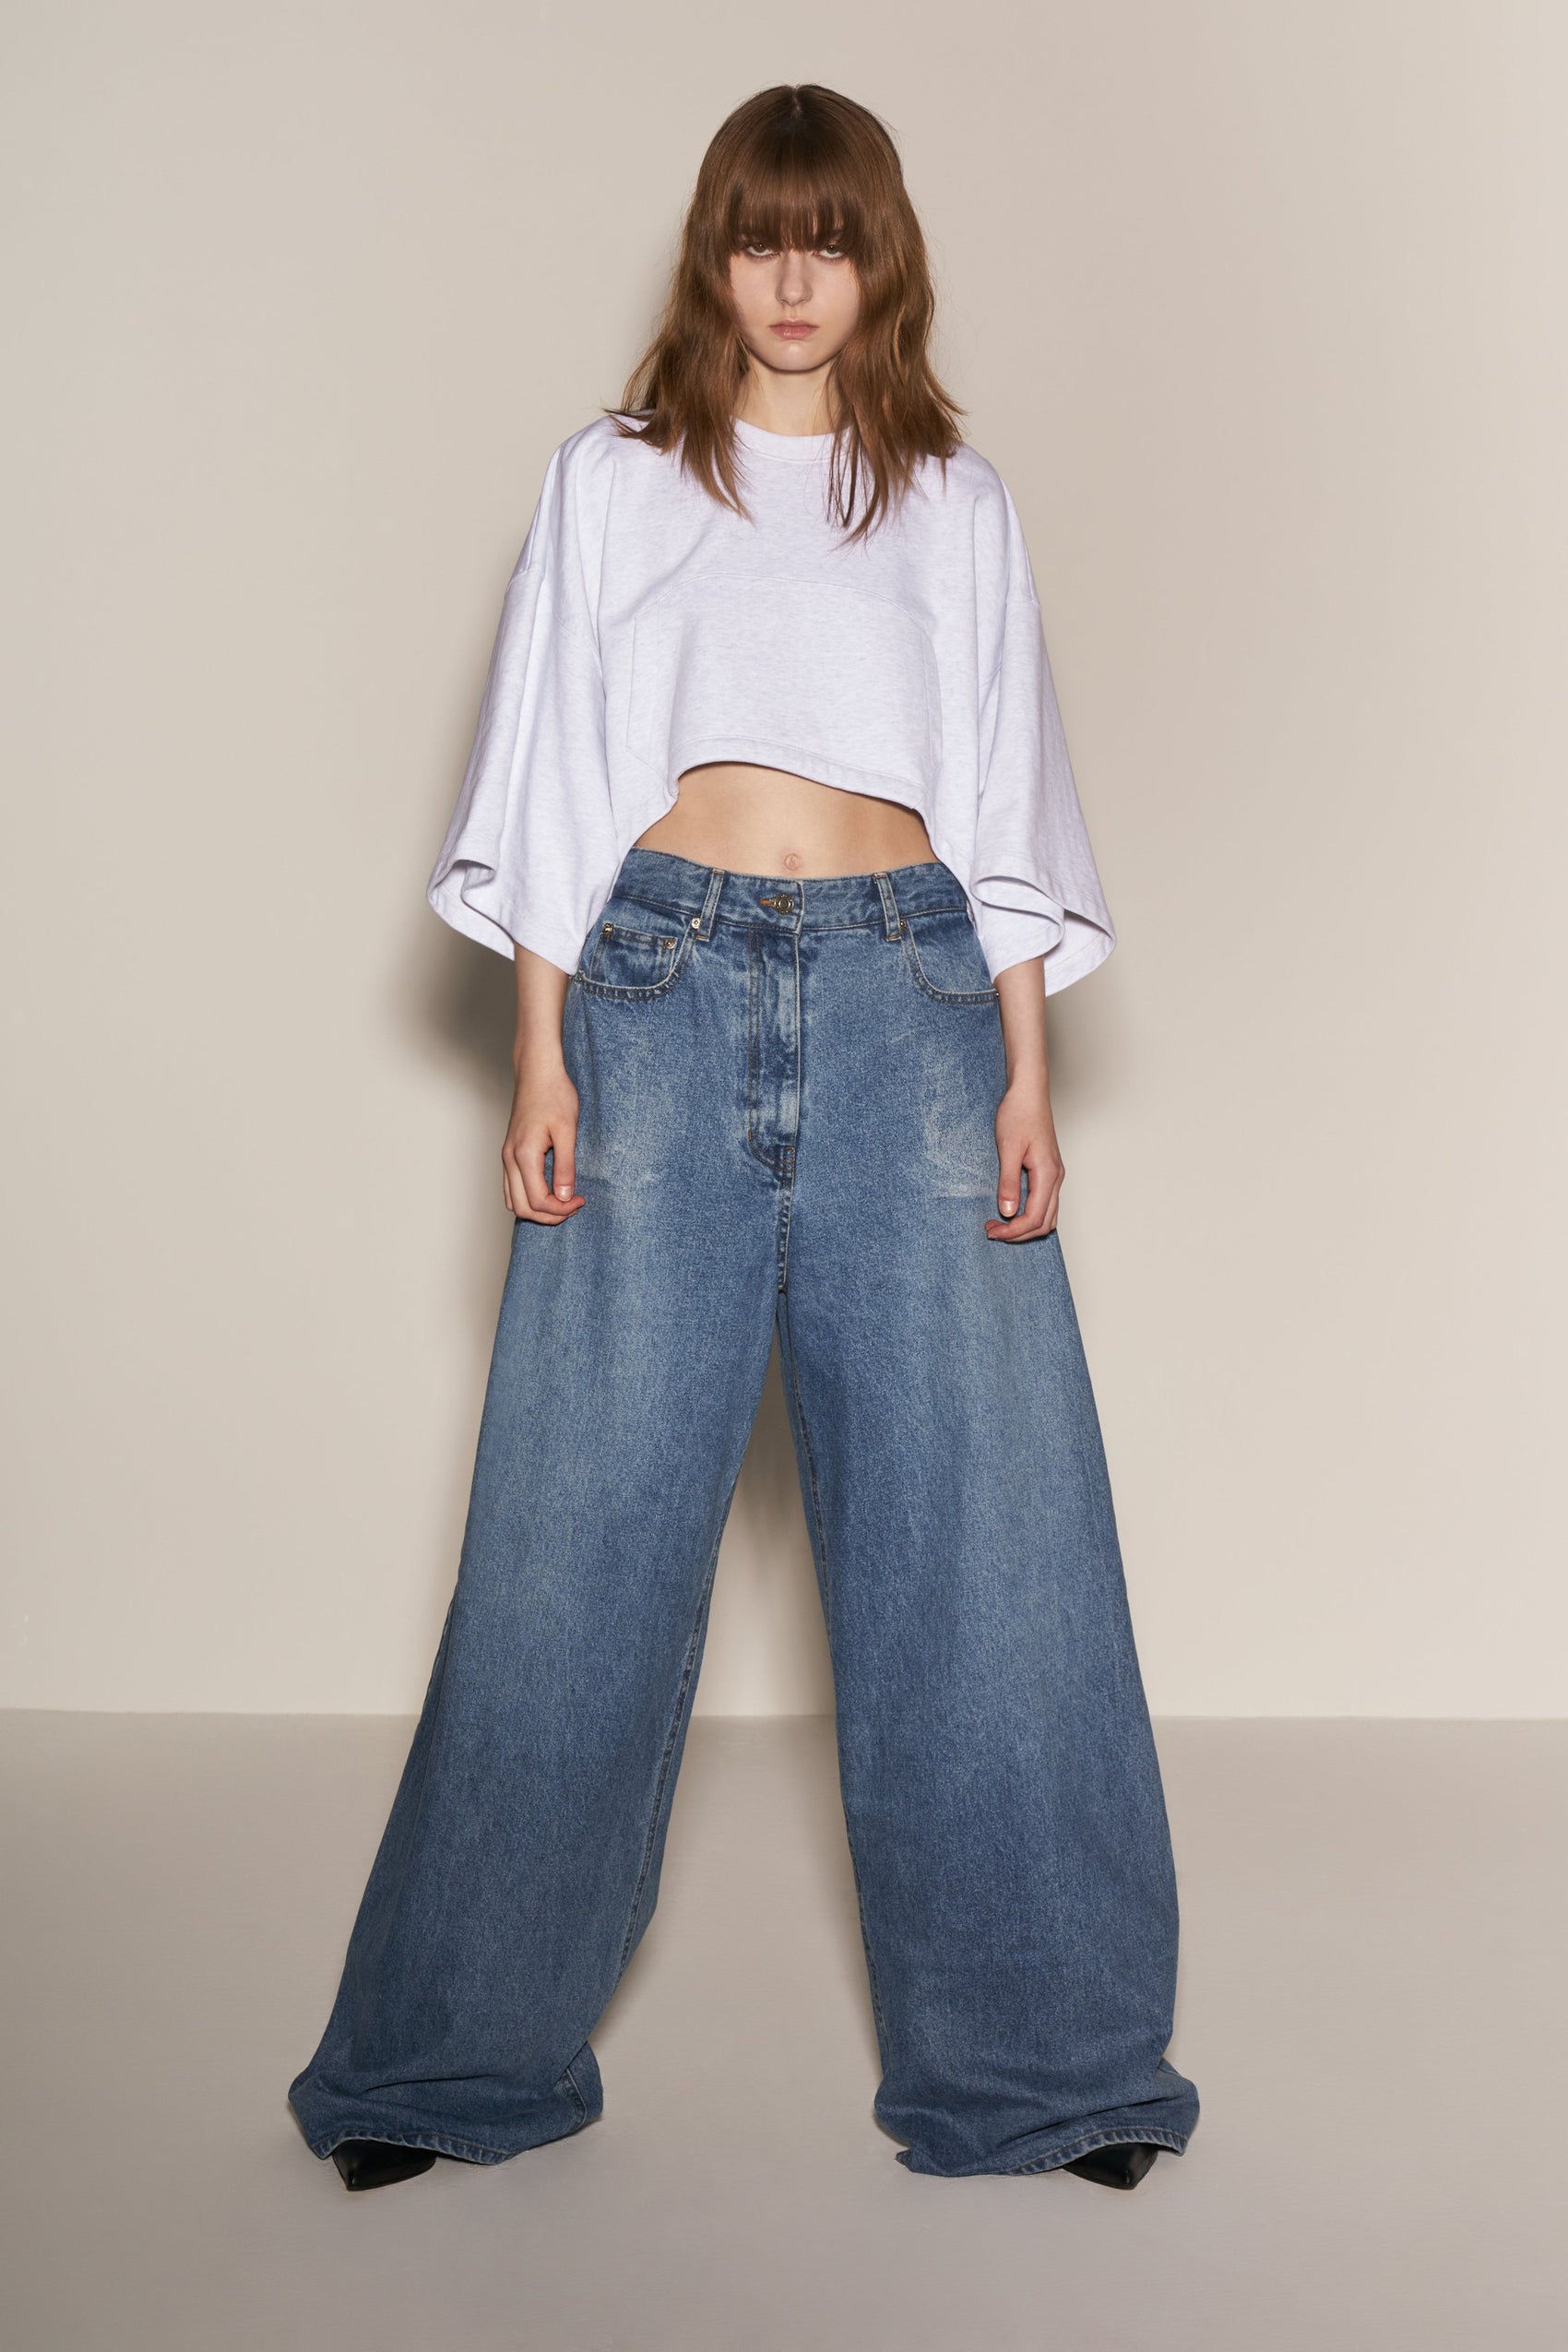 Double Tucked Jeans System